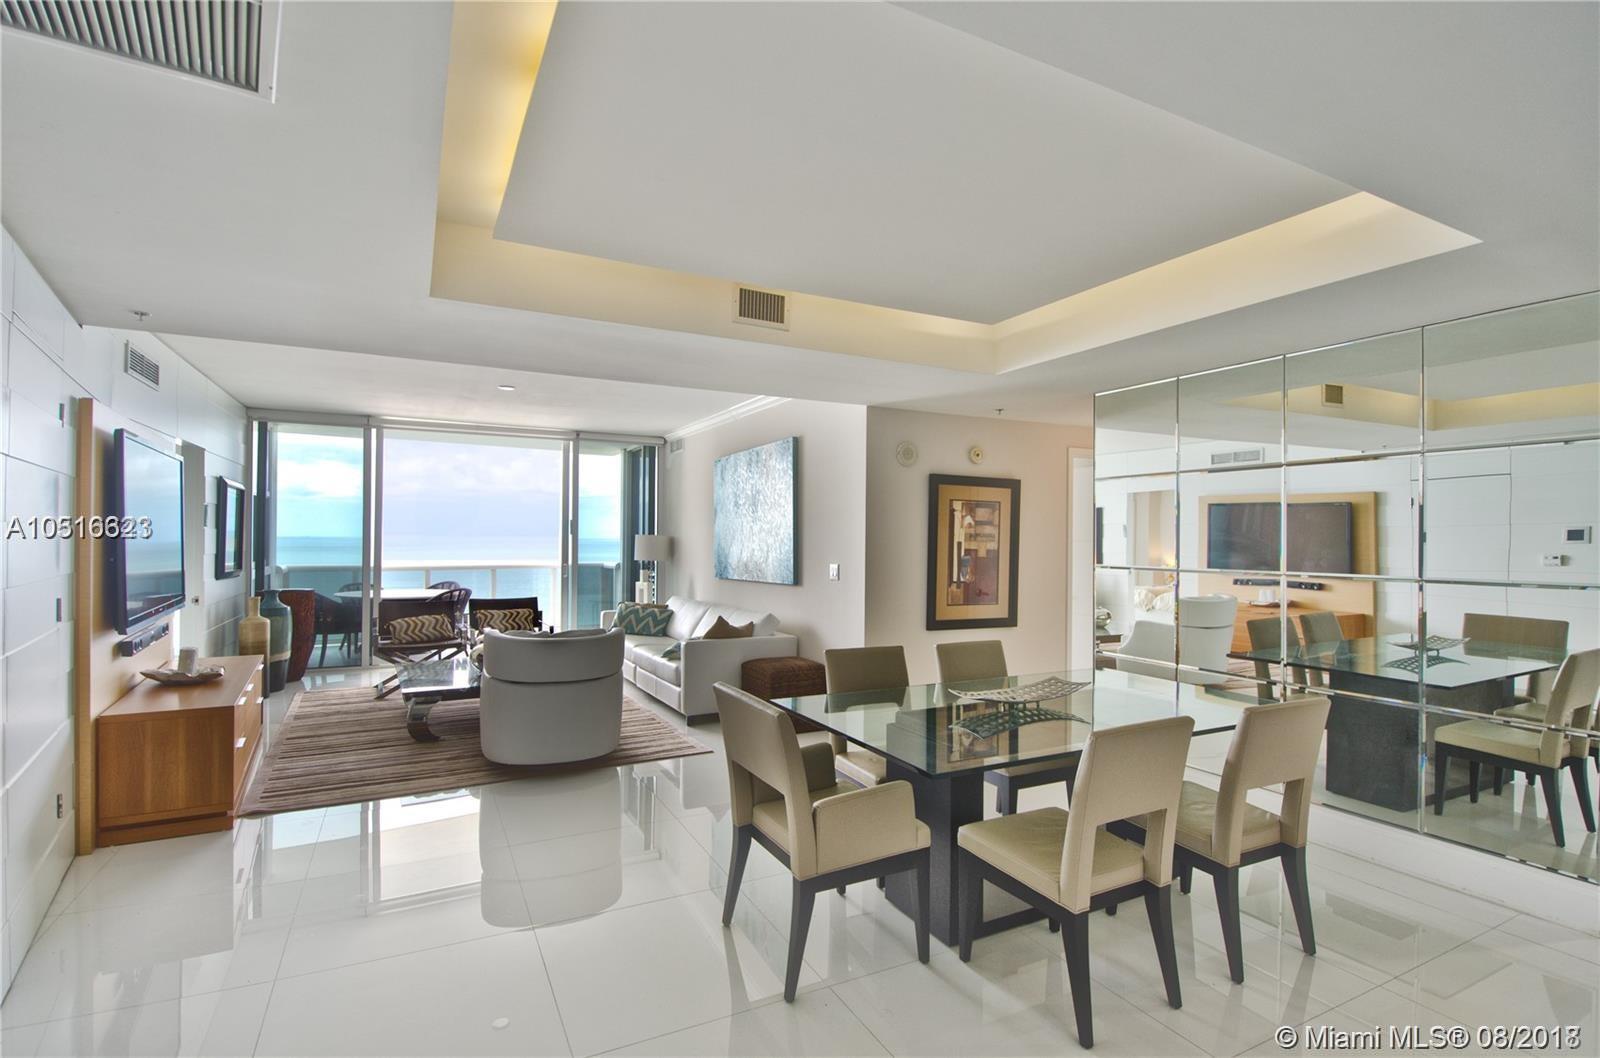 18201 Collins Ave 1206, Sunny Isles Beach, Florida 33160, 3 Bedrooms Bedrooms, ,3 BathroomsBathrooms,Residentiallease,For Rent,18201 Collins Ave 1206,A10516623